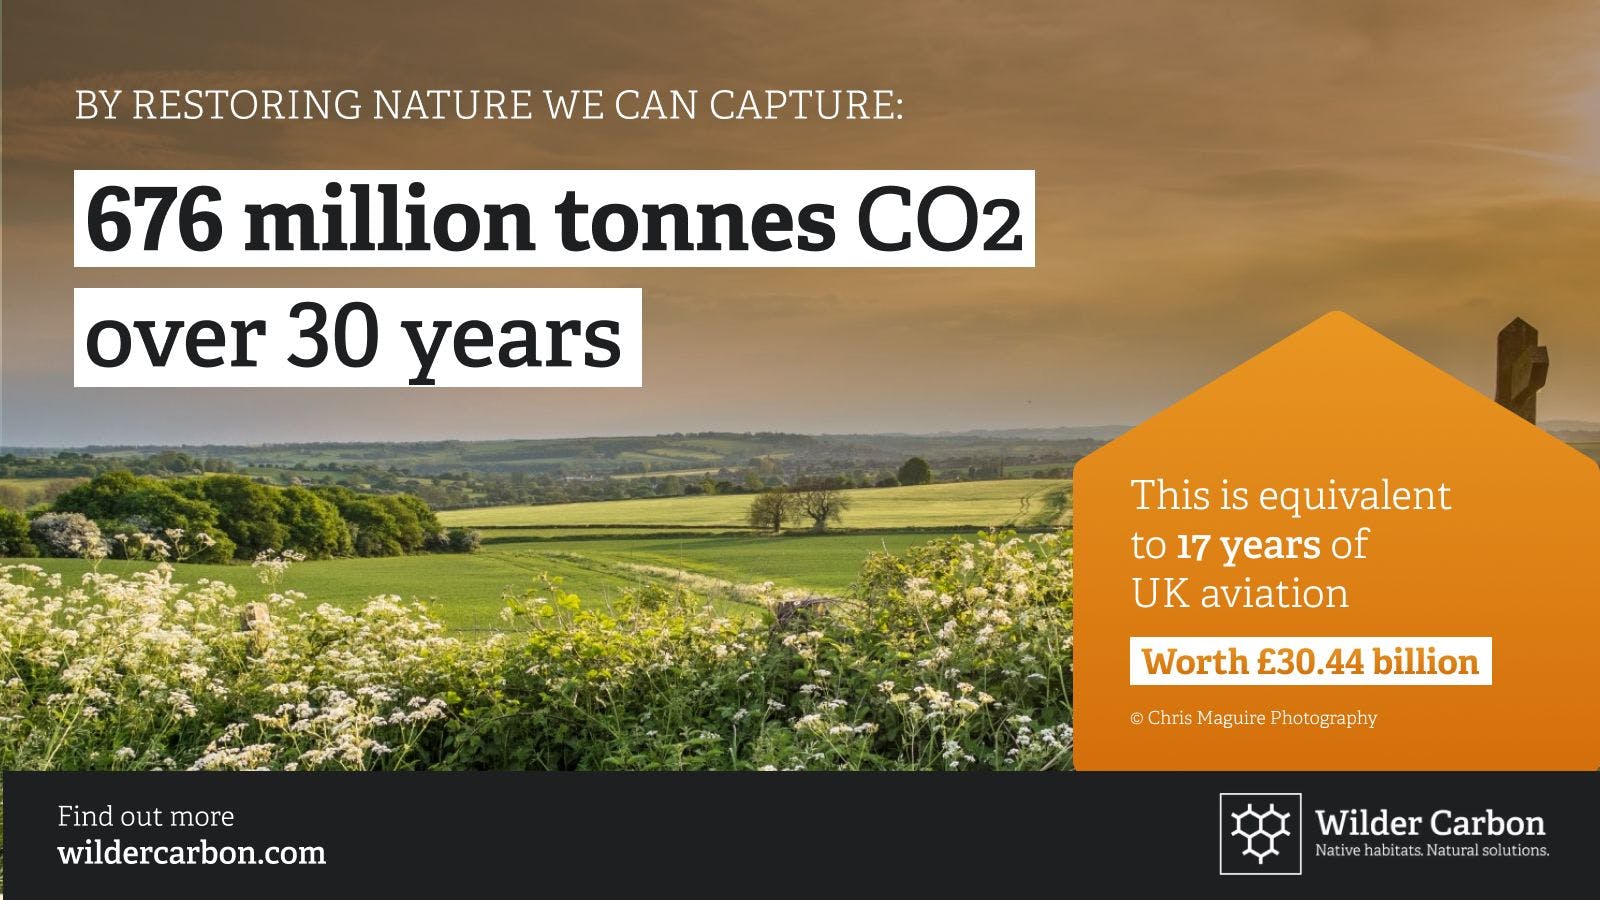 By restoring nature we can capture 676 million tonnes of CO2 over 30 years